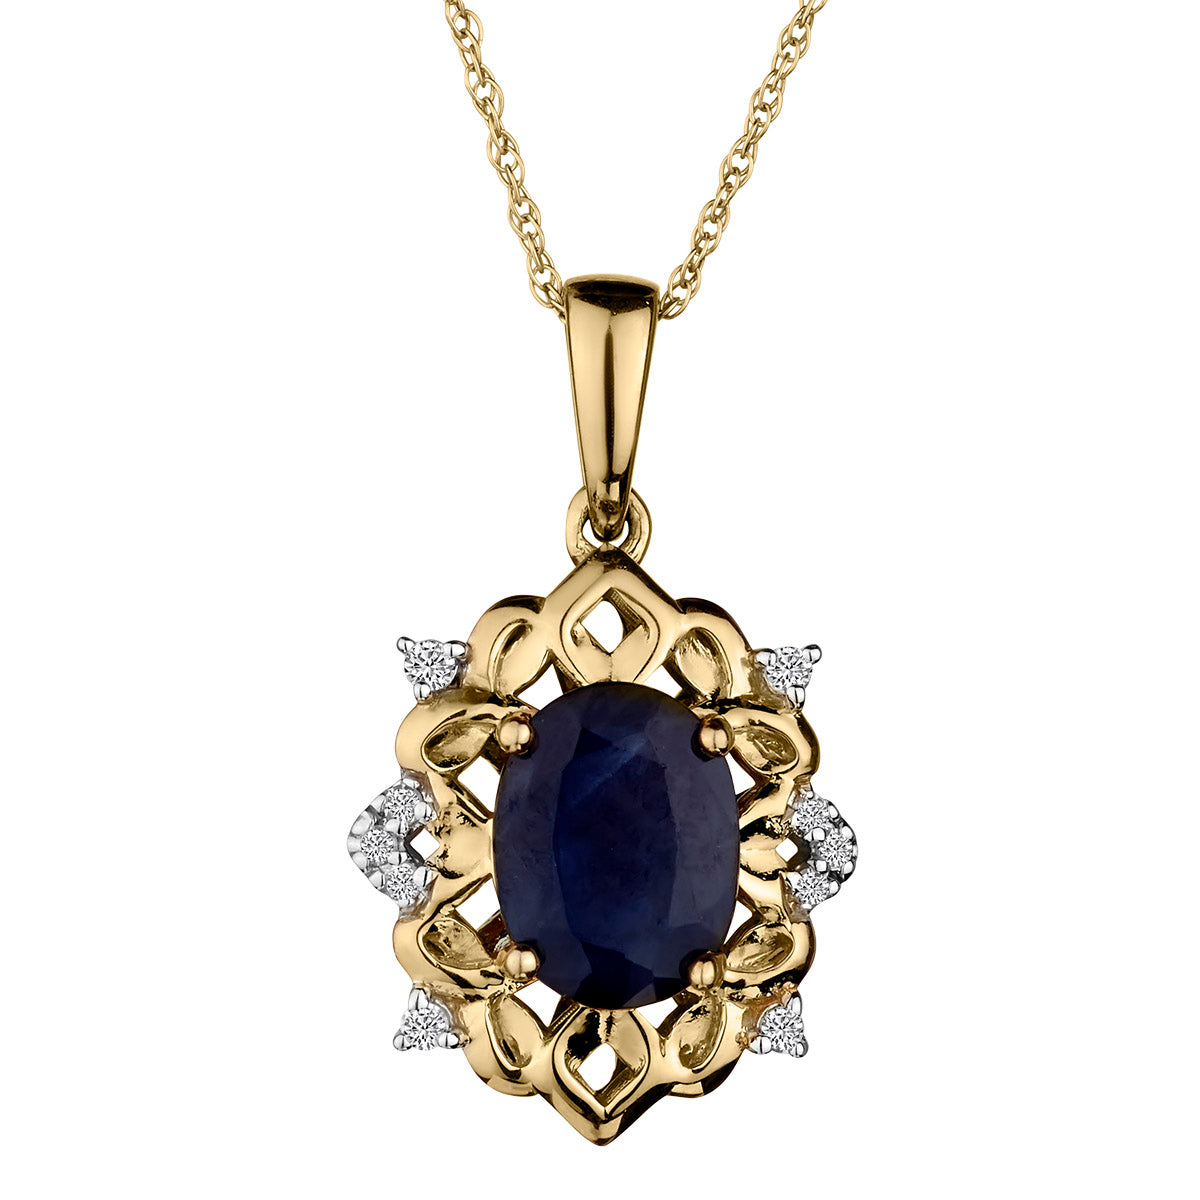 Genuine Blue Sapphire and .10 Carat of Diamonds Pendant  10kt Yellow Gold. Necklaces and Pendants. Griffin Jewellery Designs.